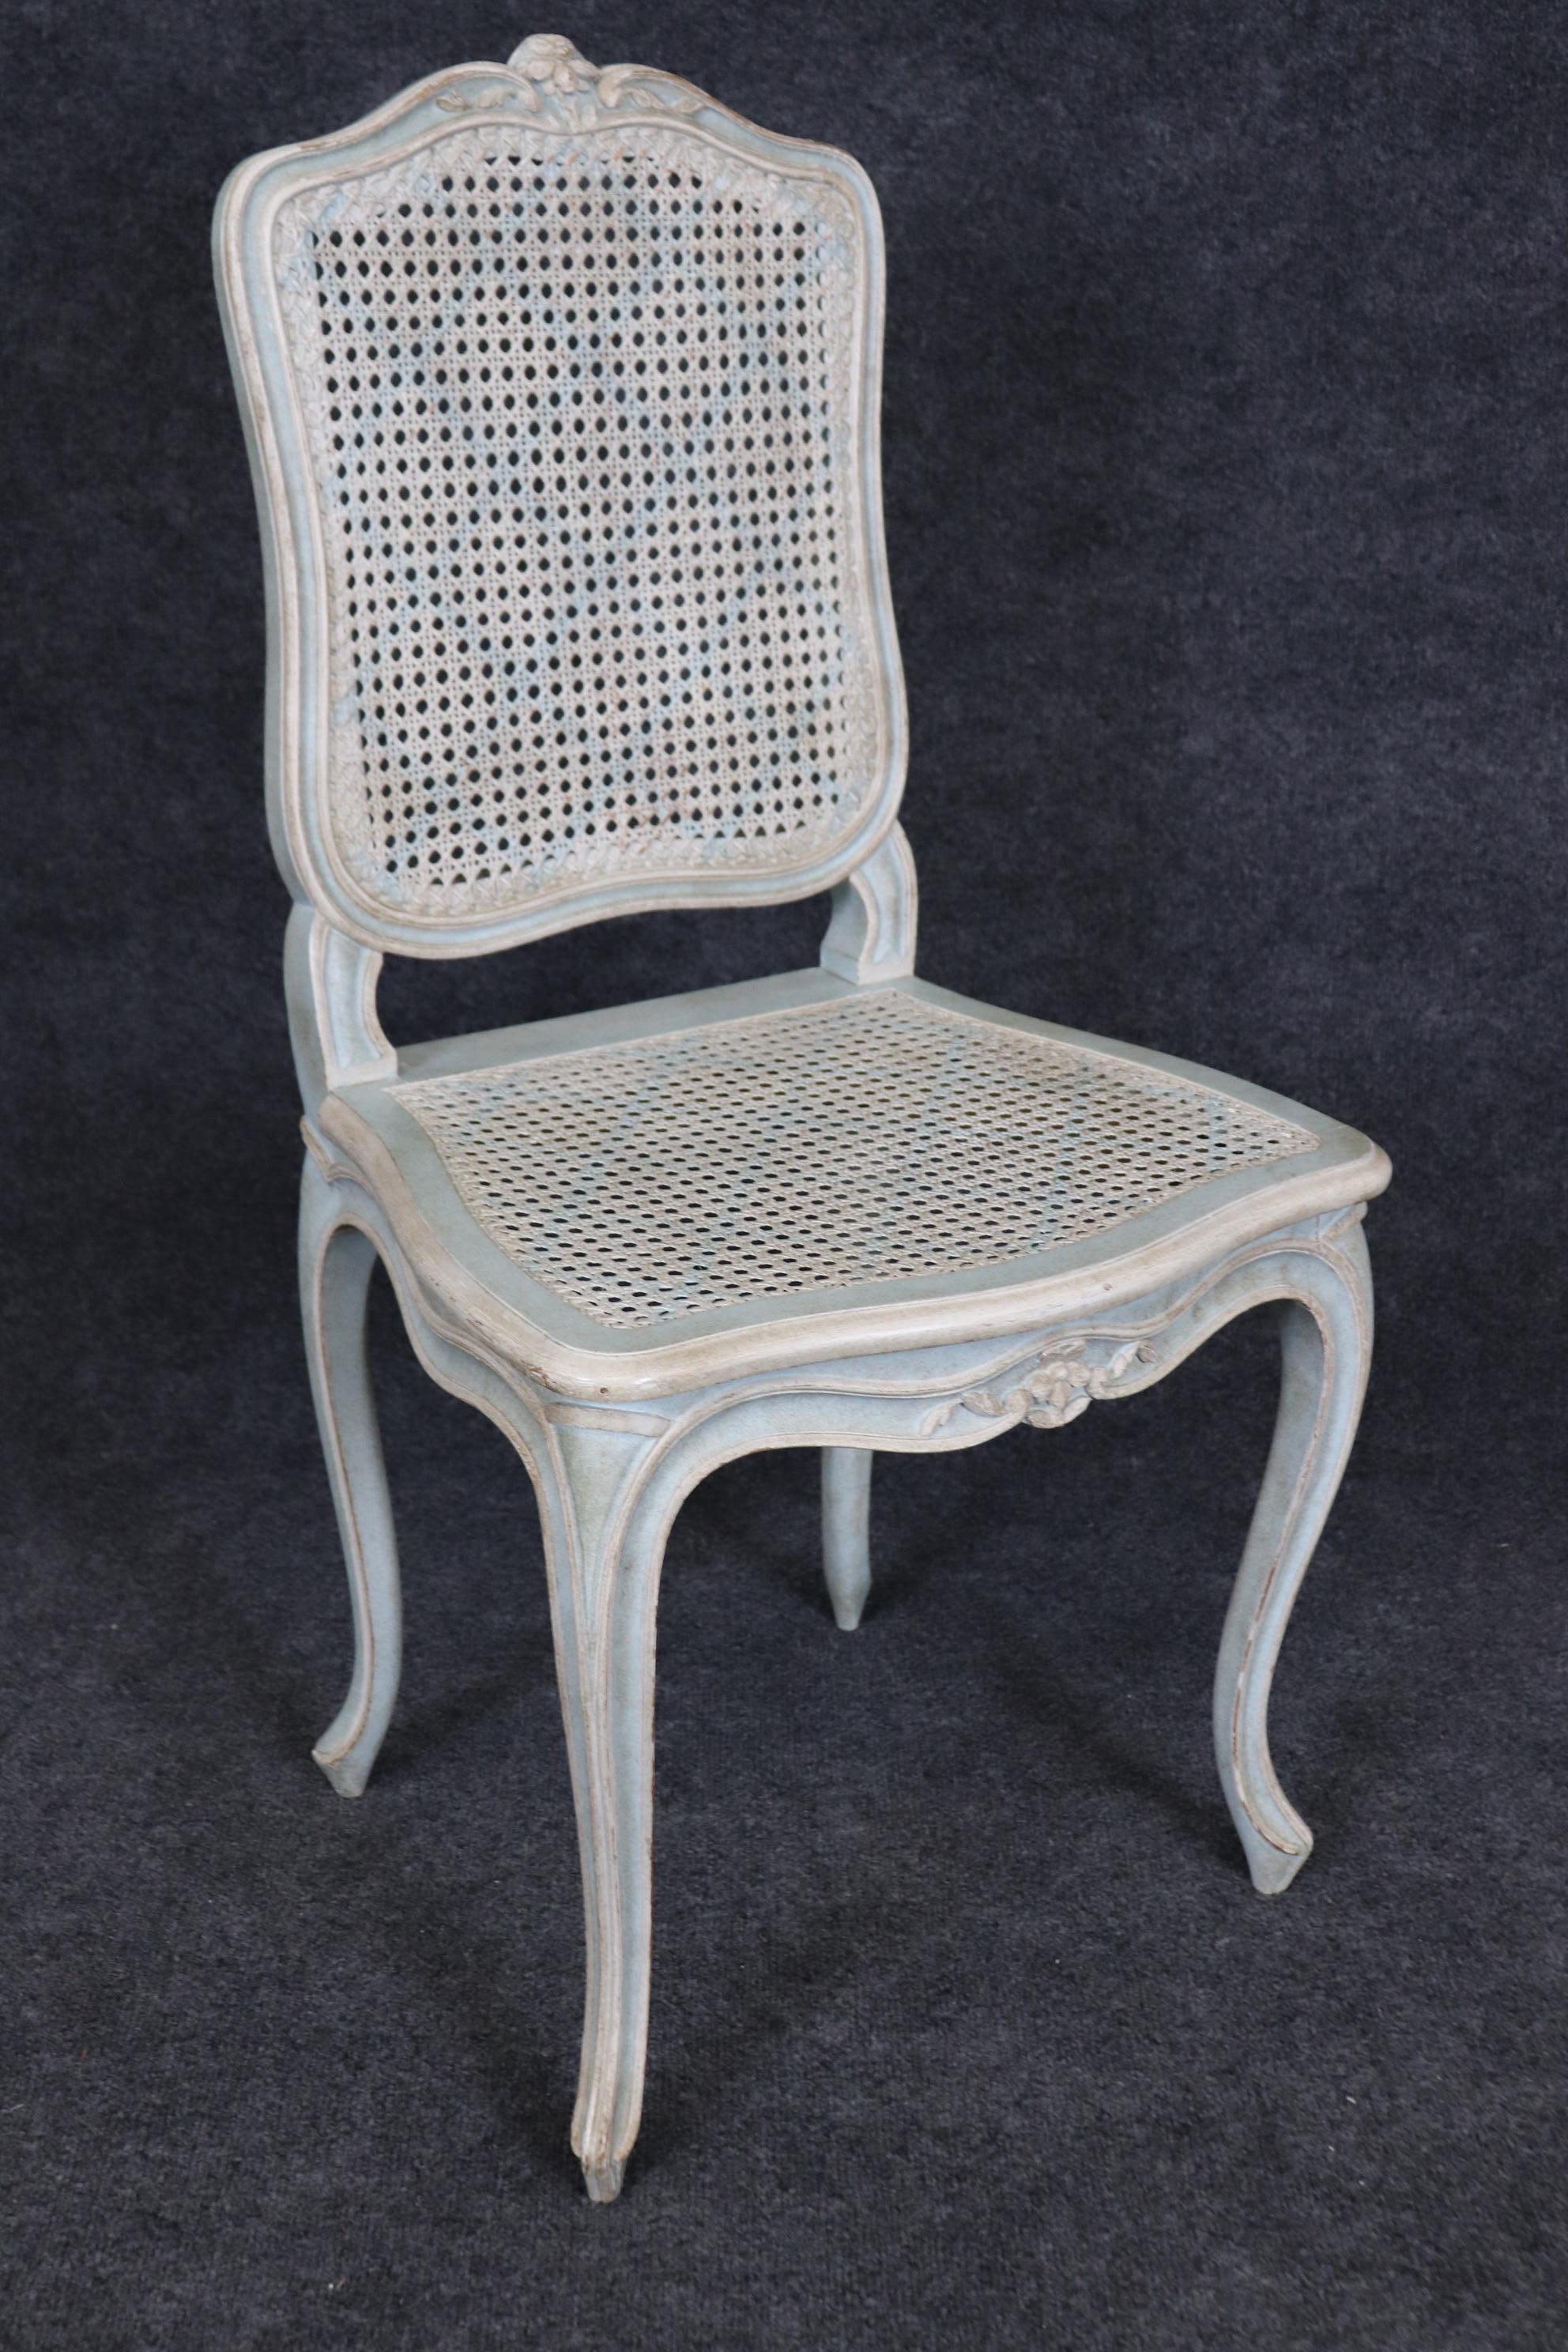 This is a rare robin's egg blue and creme paint decorated set of 12 cane chairs. The chairs have age-appropriate distressing and wear. One chair has a large hole in it and will need to be either repaired or upholstered. Measures 37 tall x 19 wide x